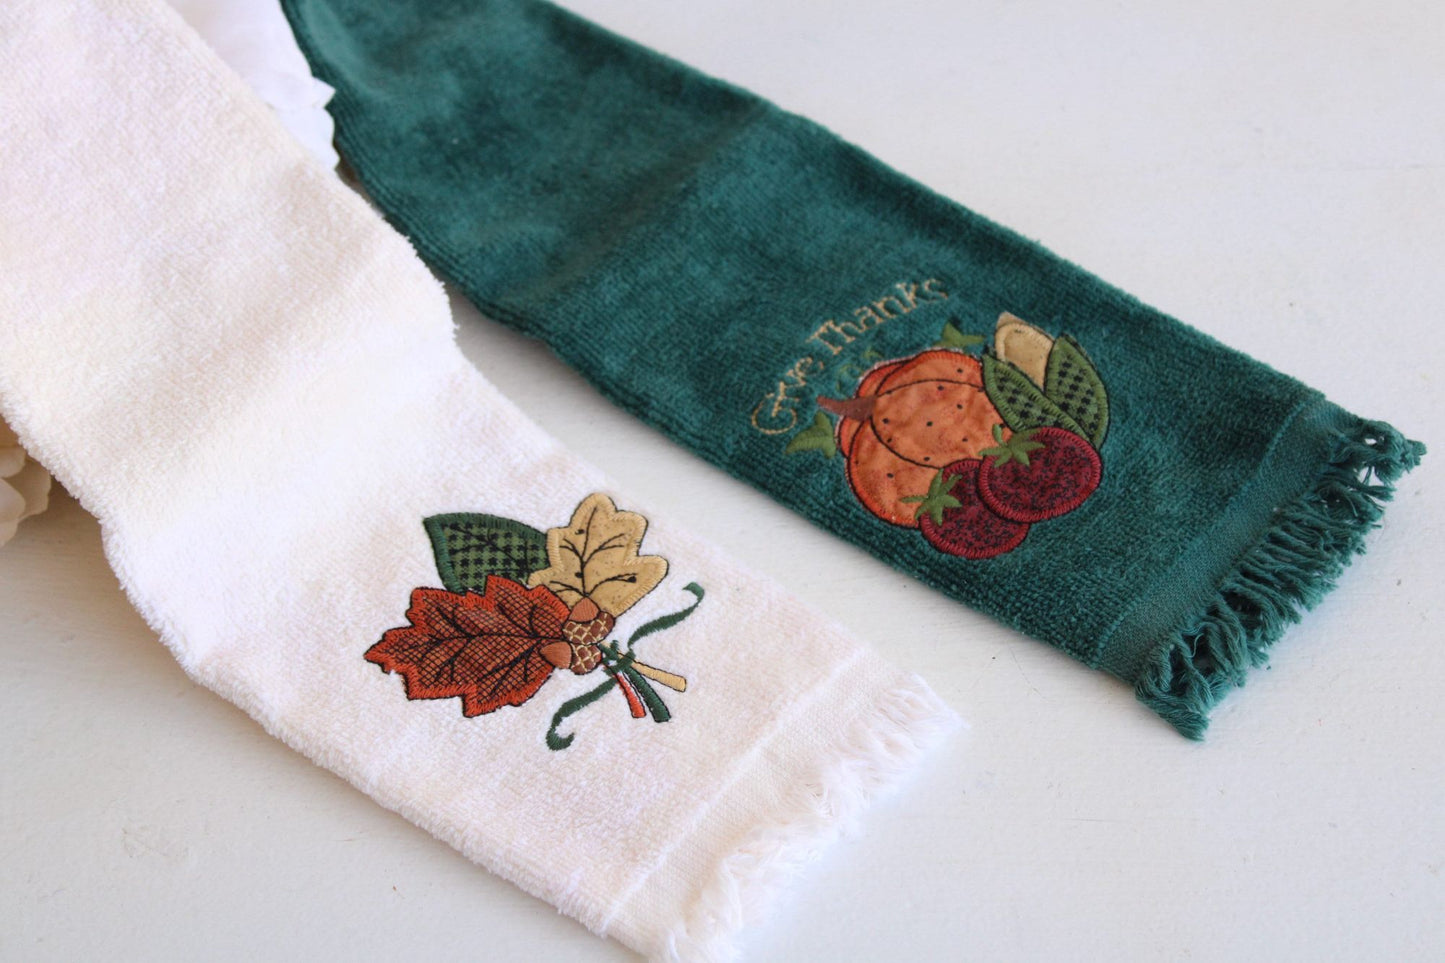 Vintage 1980s 1990s Thanksgiving or Autumn Theme Pair of  Hand Towels